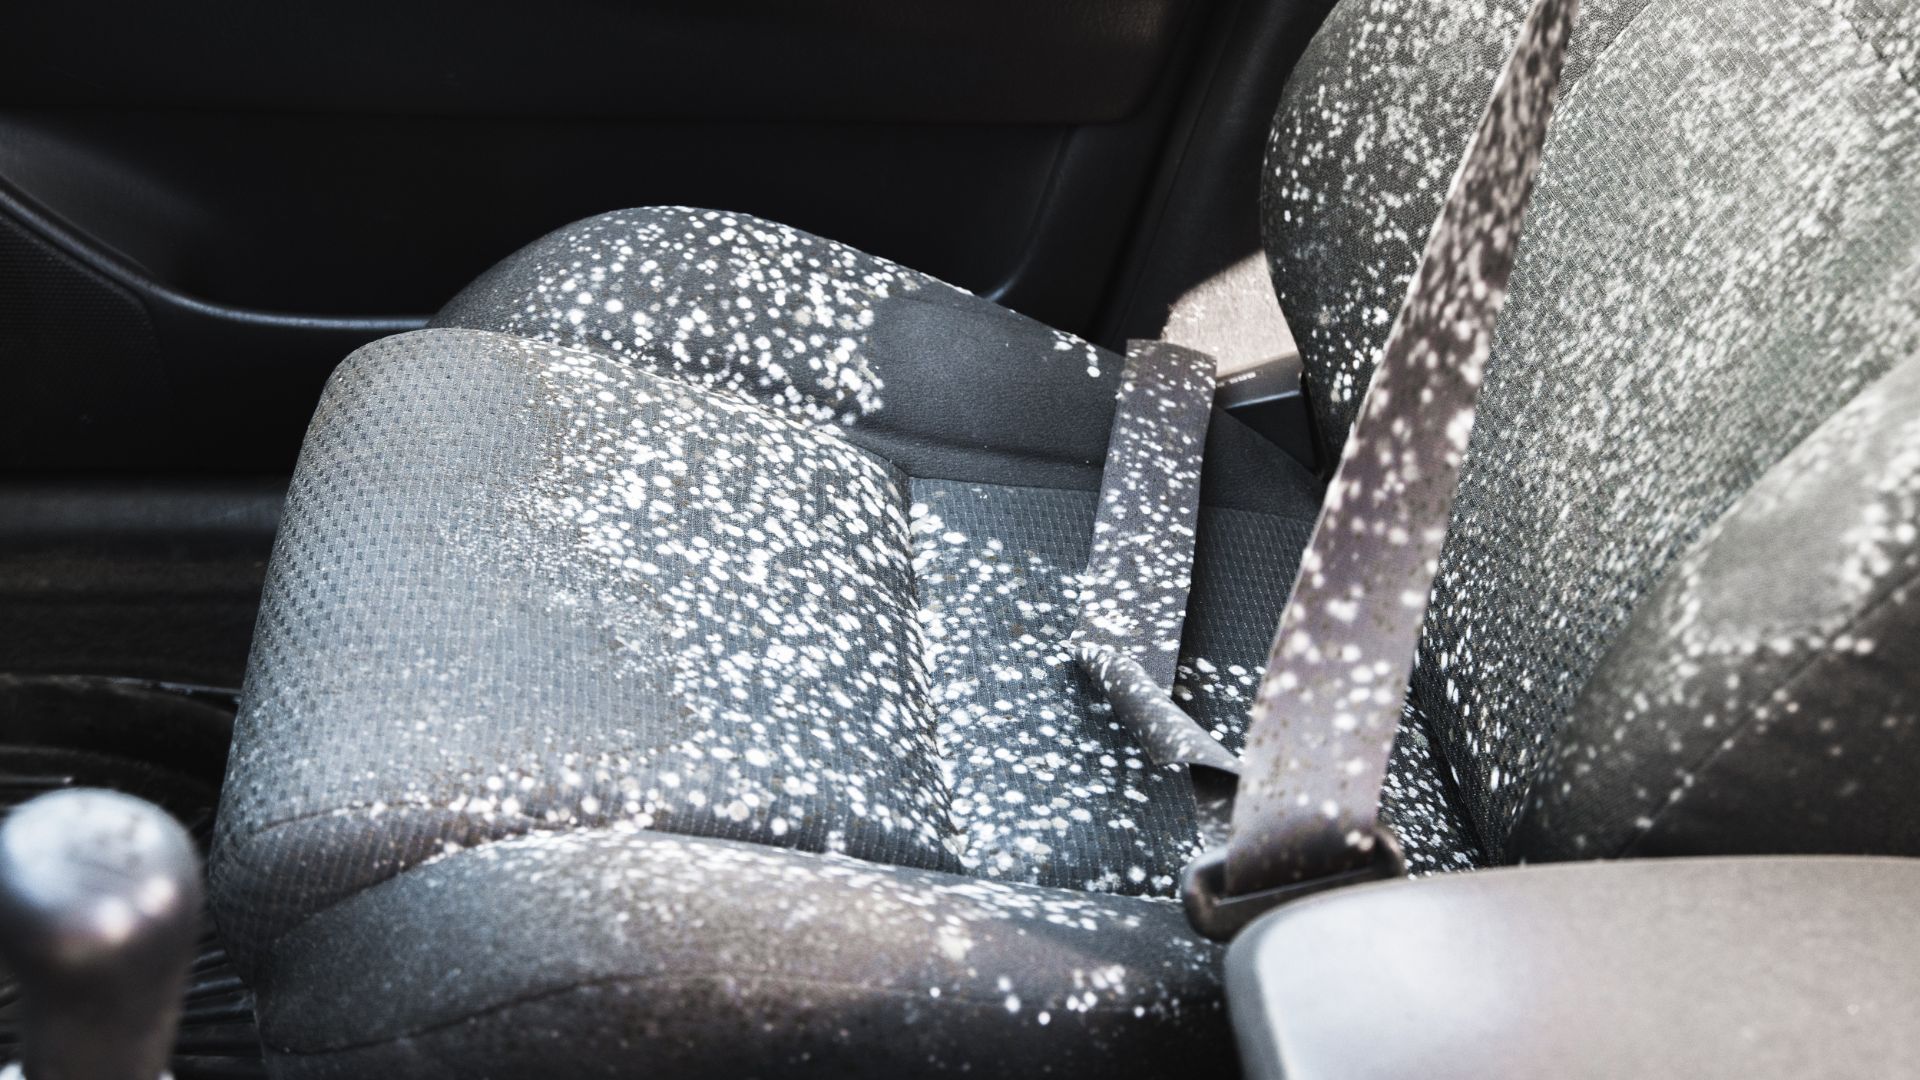 the interior of a car with a gray and white seat cover.